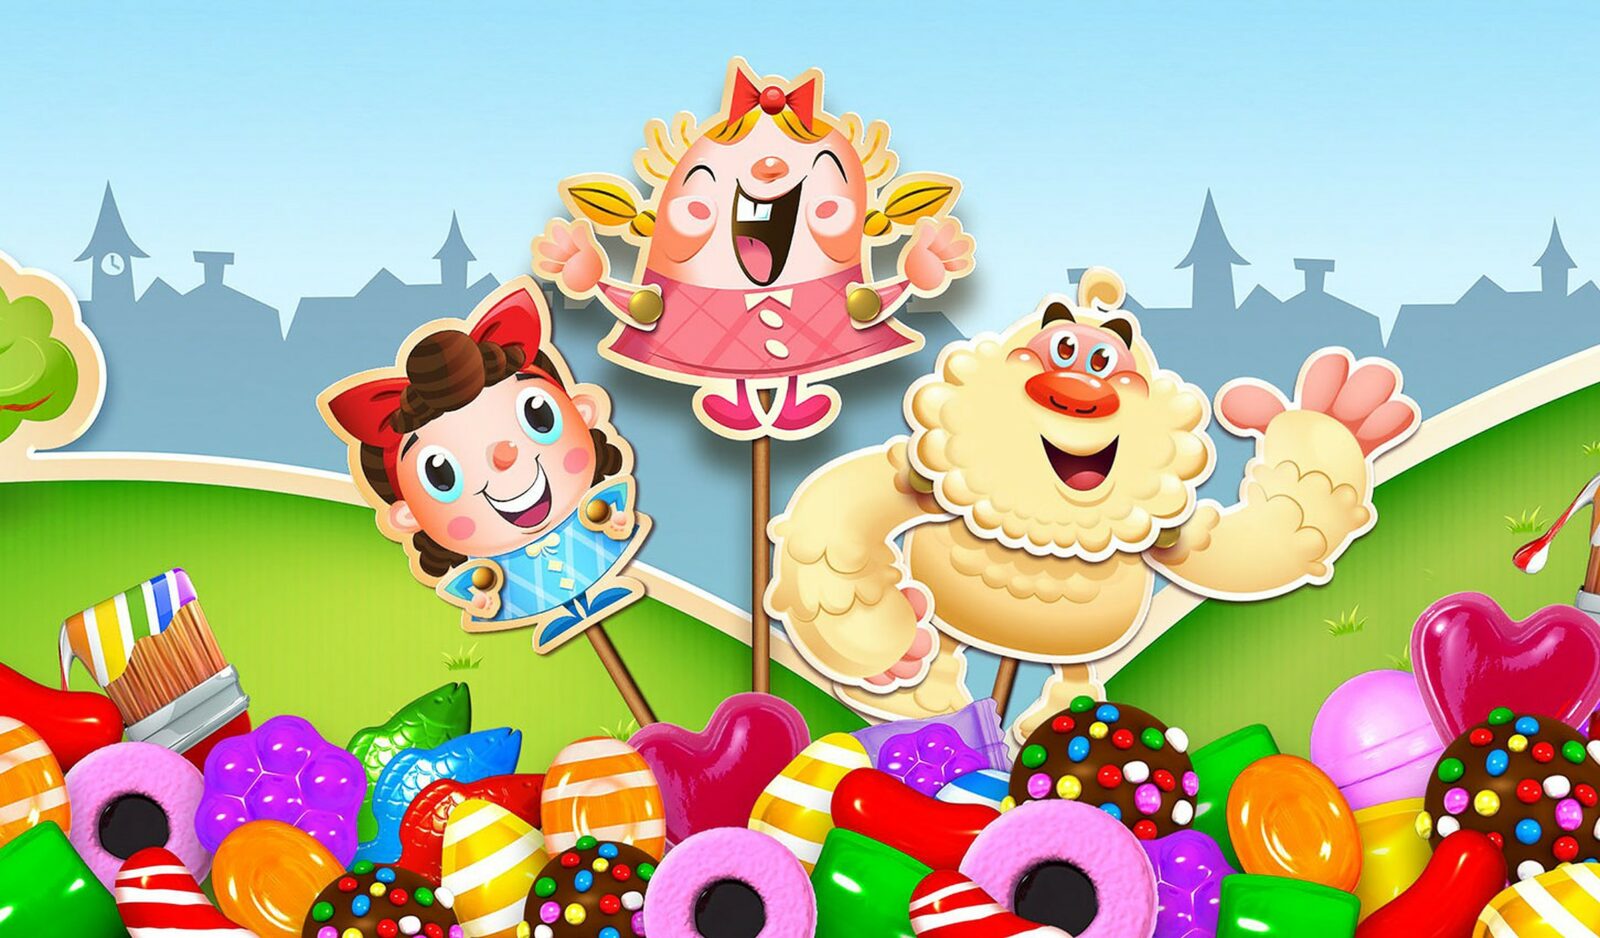 Why playing Candy Crush at work is actually very healthy